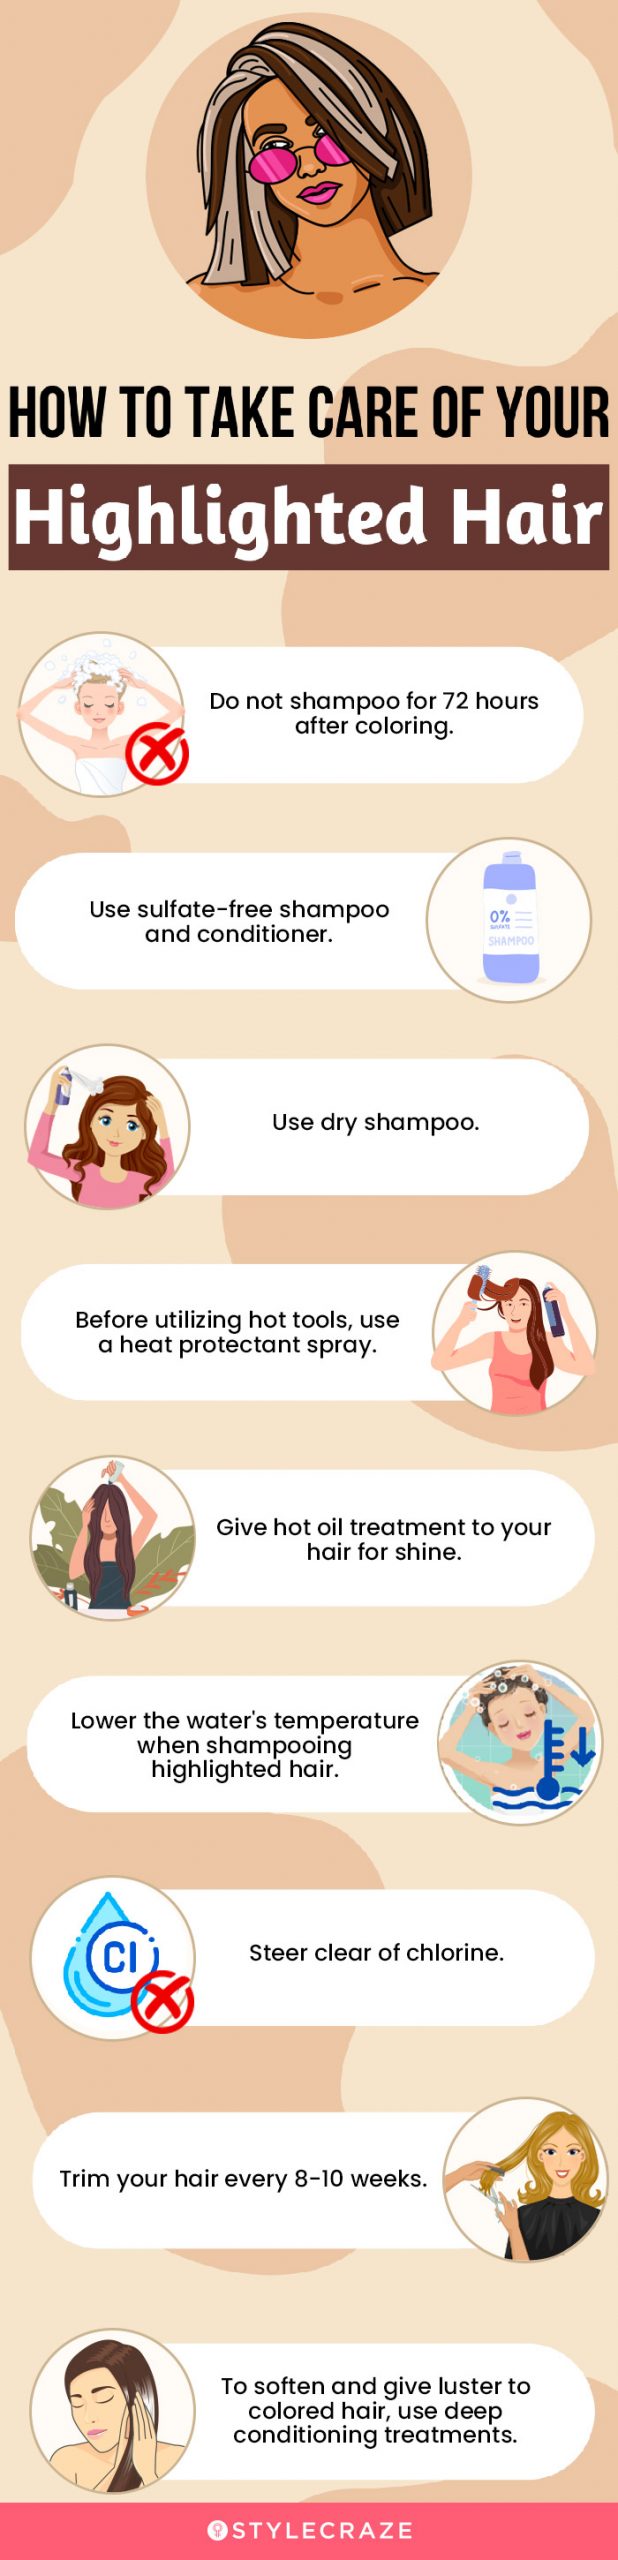 how to take care of your highlited hair (infographic)